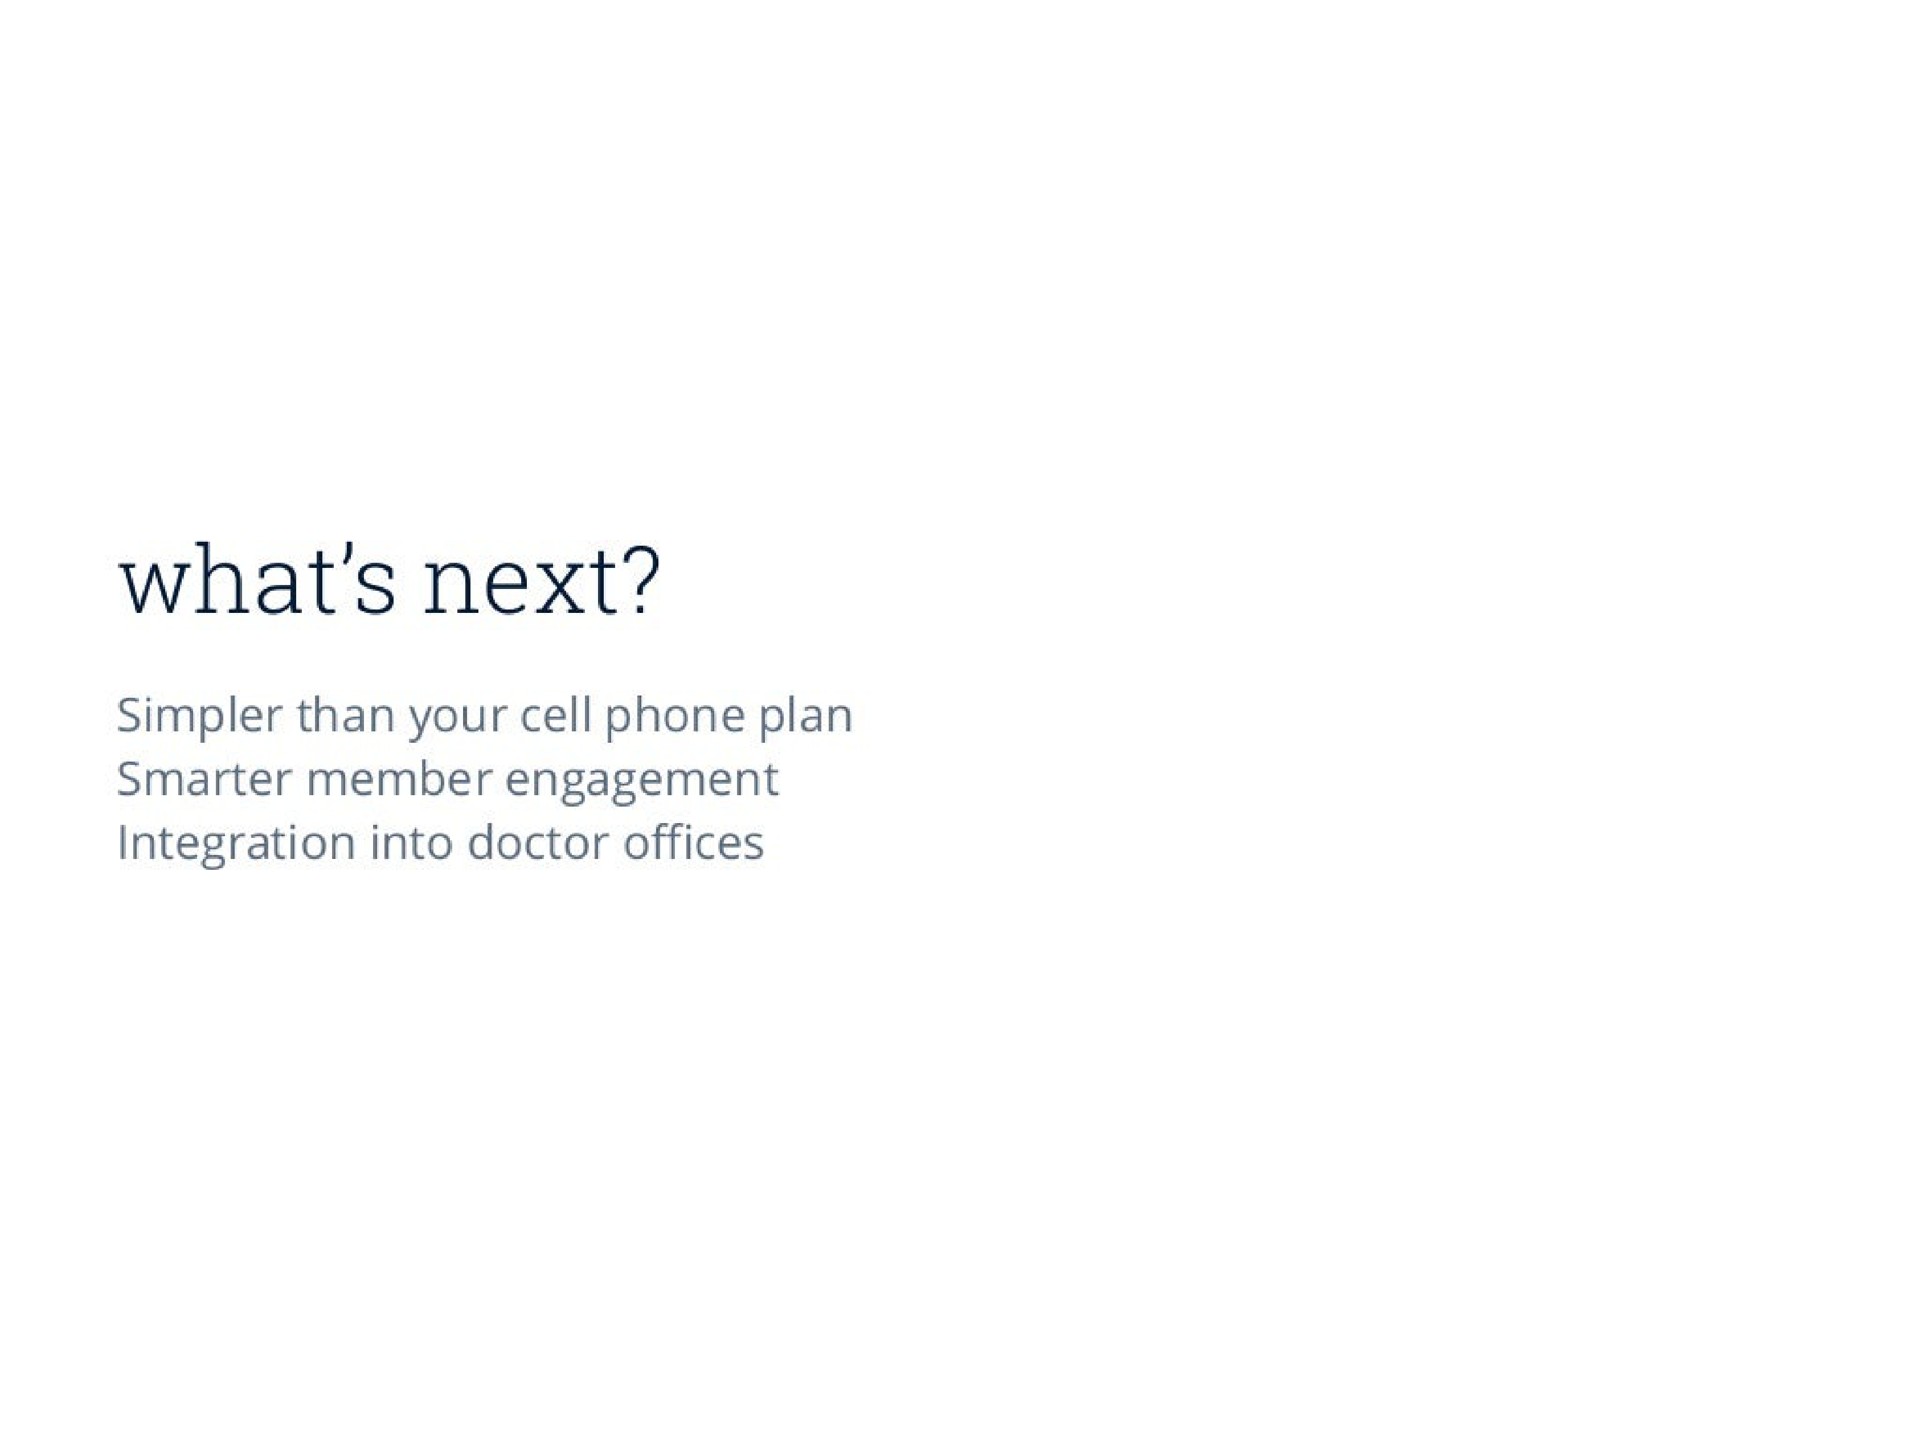 what next simpler than your cell phone plan member engagement integration into doctor offices | Oscar Health